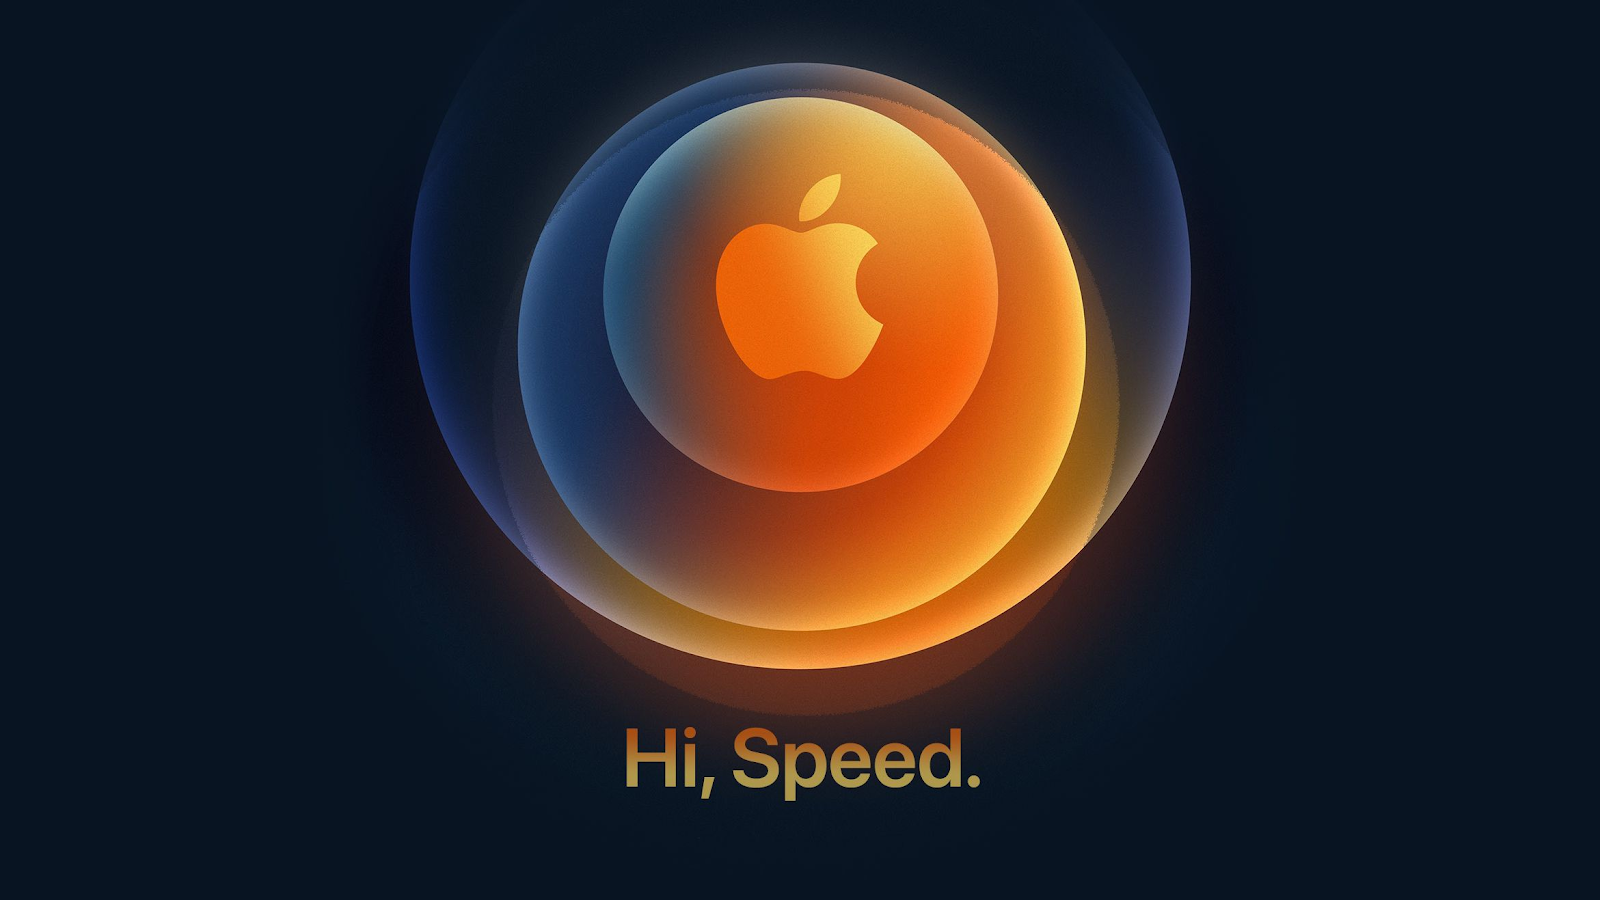 BIGnews from Apple’s October Event